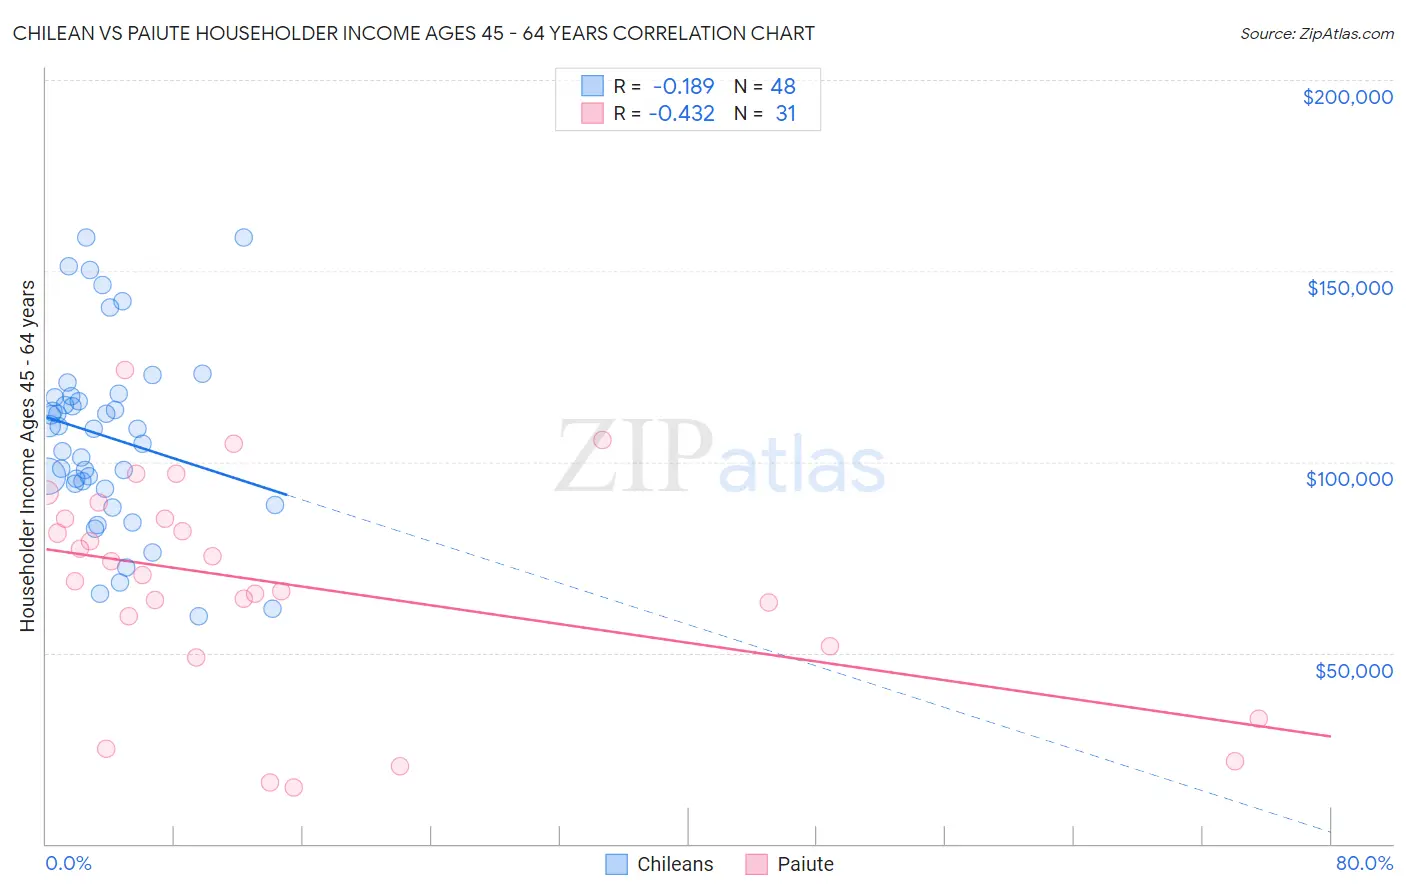 Chilean vs Paiute Householder Income Ages 45 - 64 years